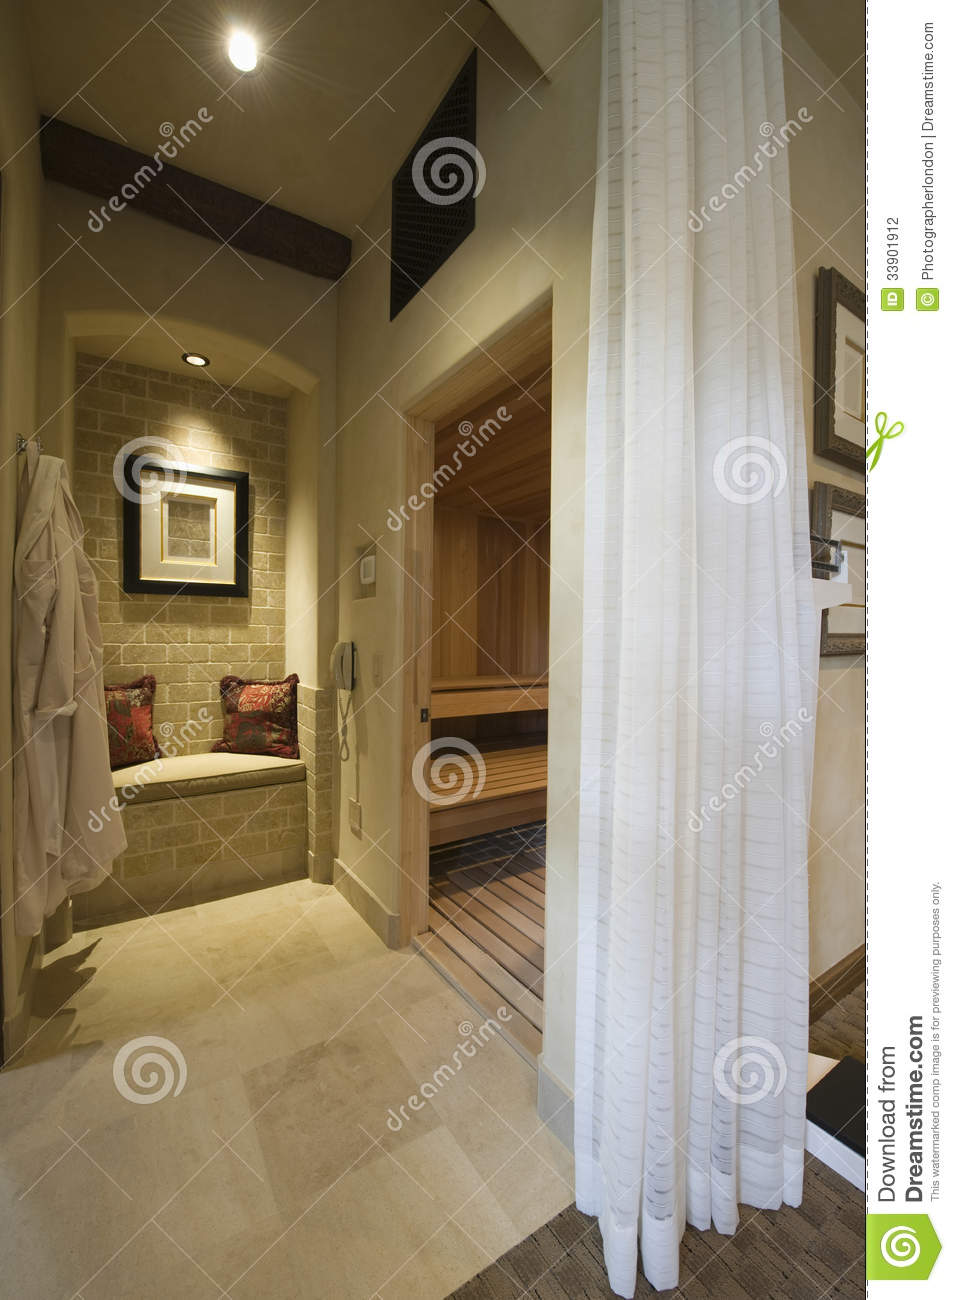 Curtained Sauna And Steam Room Stock Photography   Image  33901912